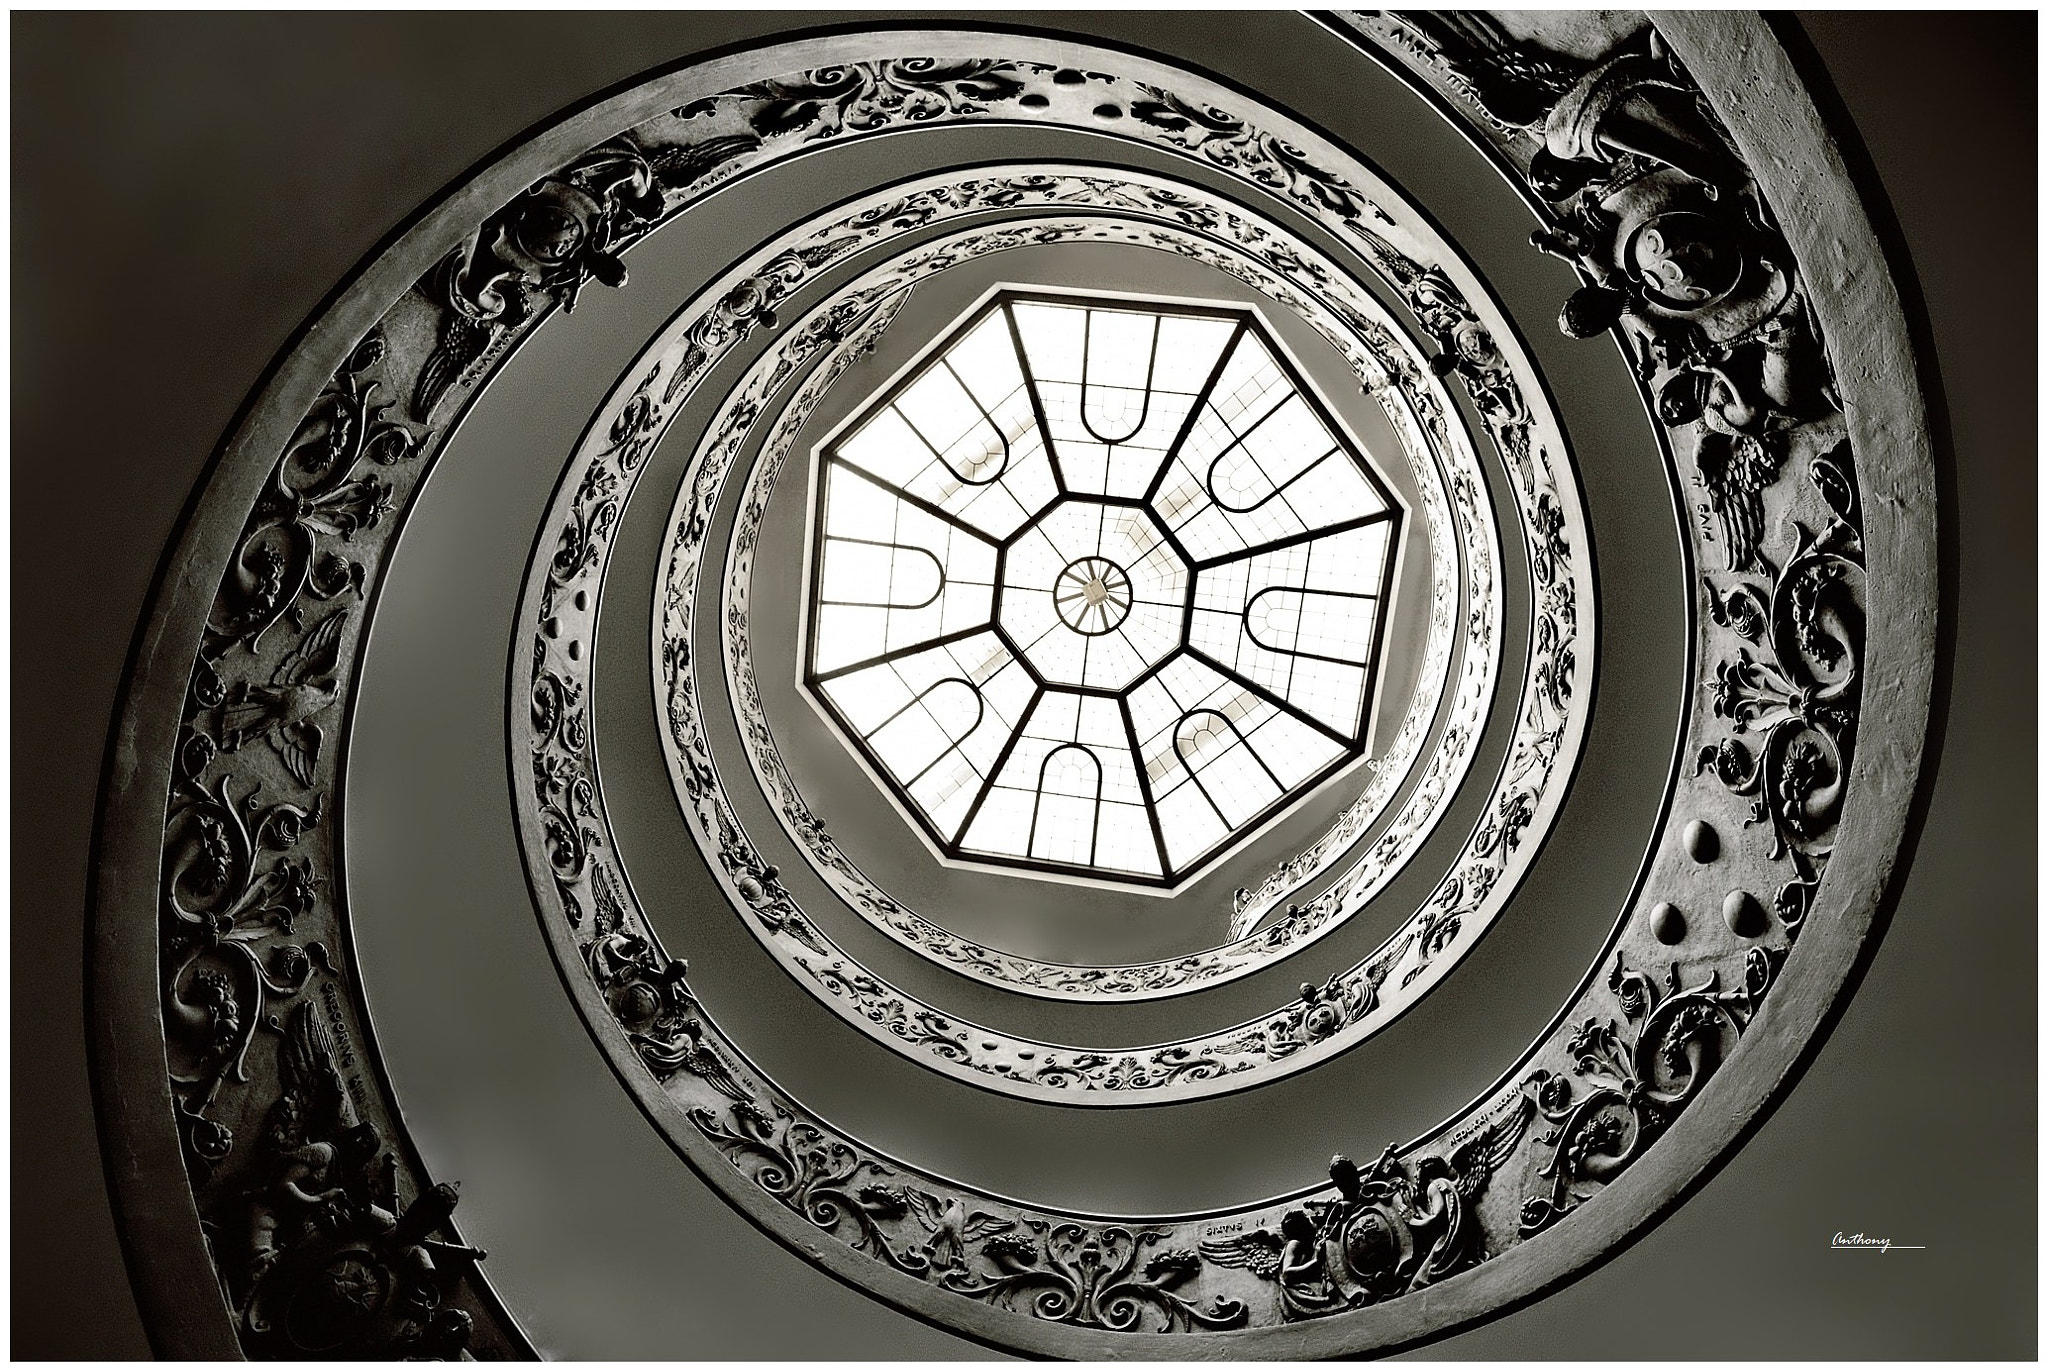 Nikon D5100 sample photo. Bramante staircase - part 2 (repost in greyscale) photography